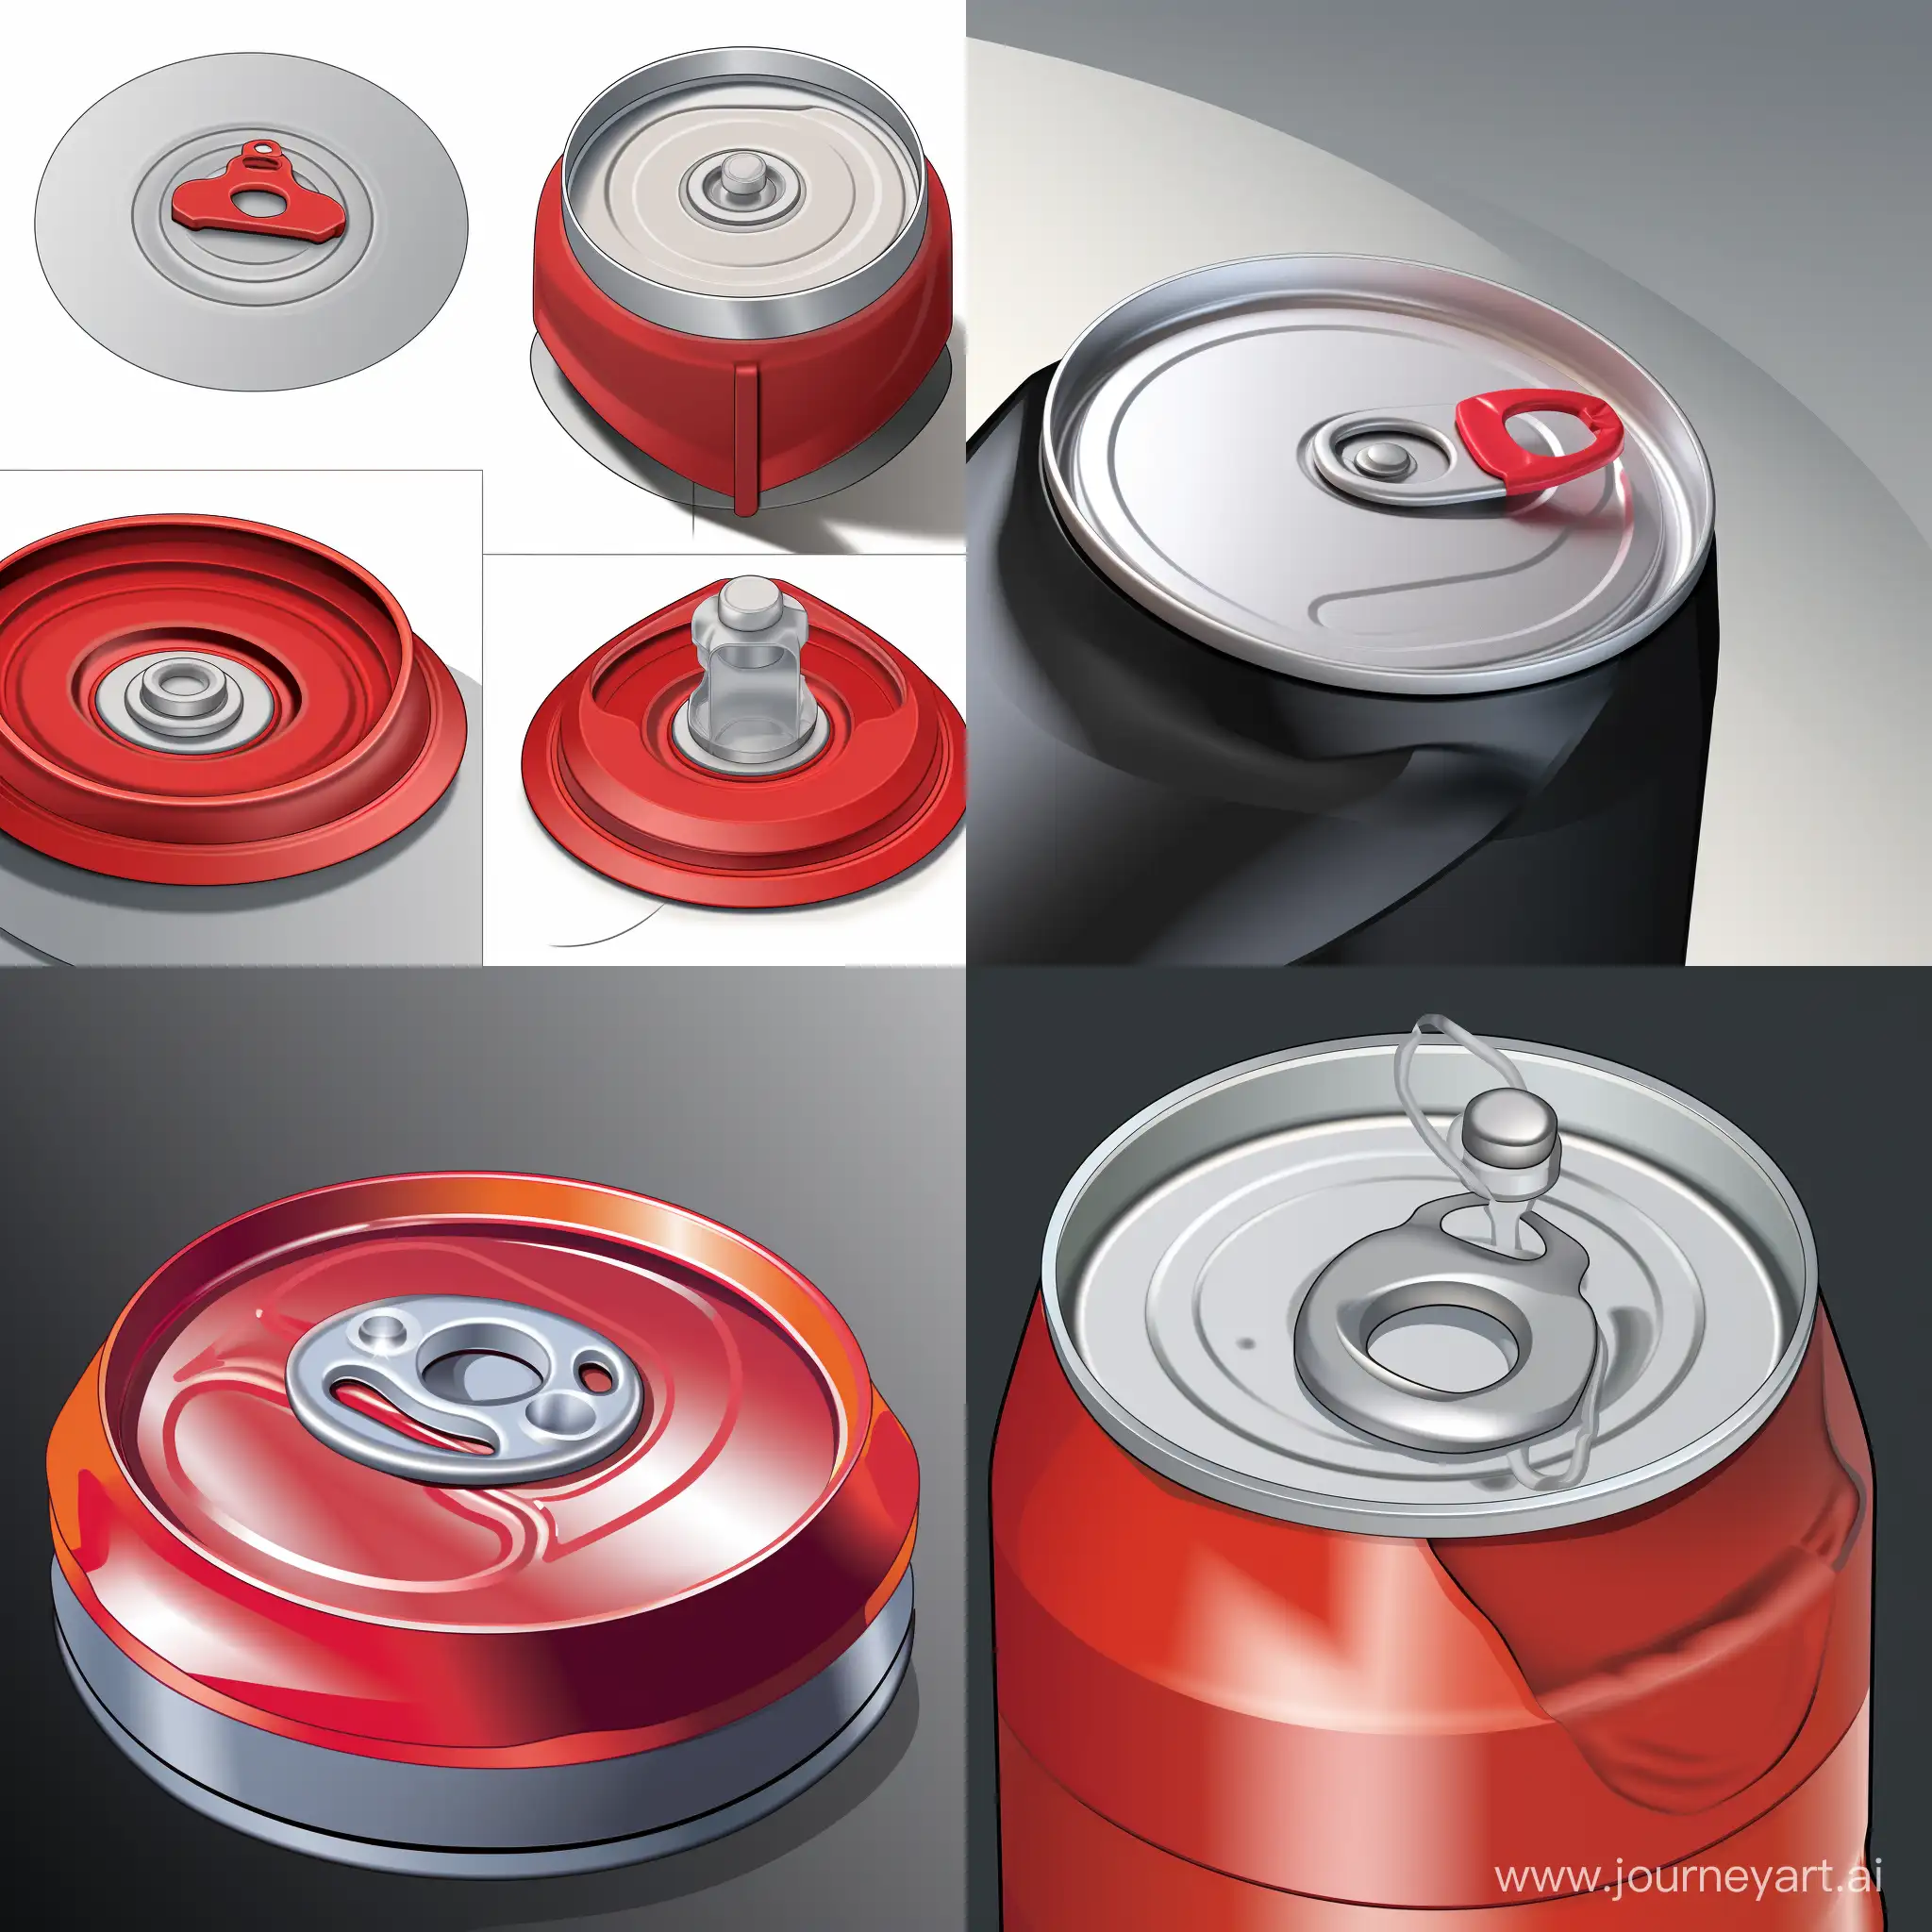 Design layout of an aluminum can. 
An aluminum can with a re-closing valve, which is made in the form of an aluminum button, in place of the standard sealing pin. A drop of red silicone is applied on top of the sealing pin to create an image of the button. The sealing pin holds the return spring, which closes the jar when returning.